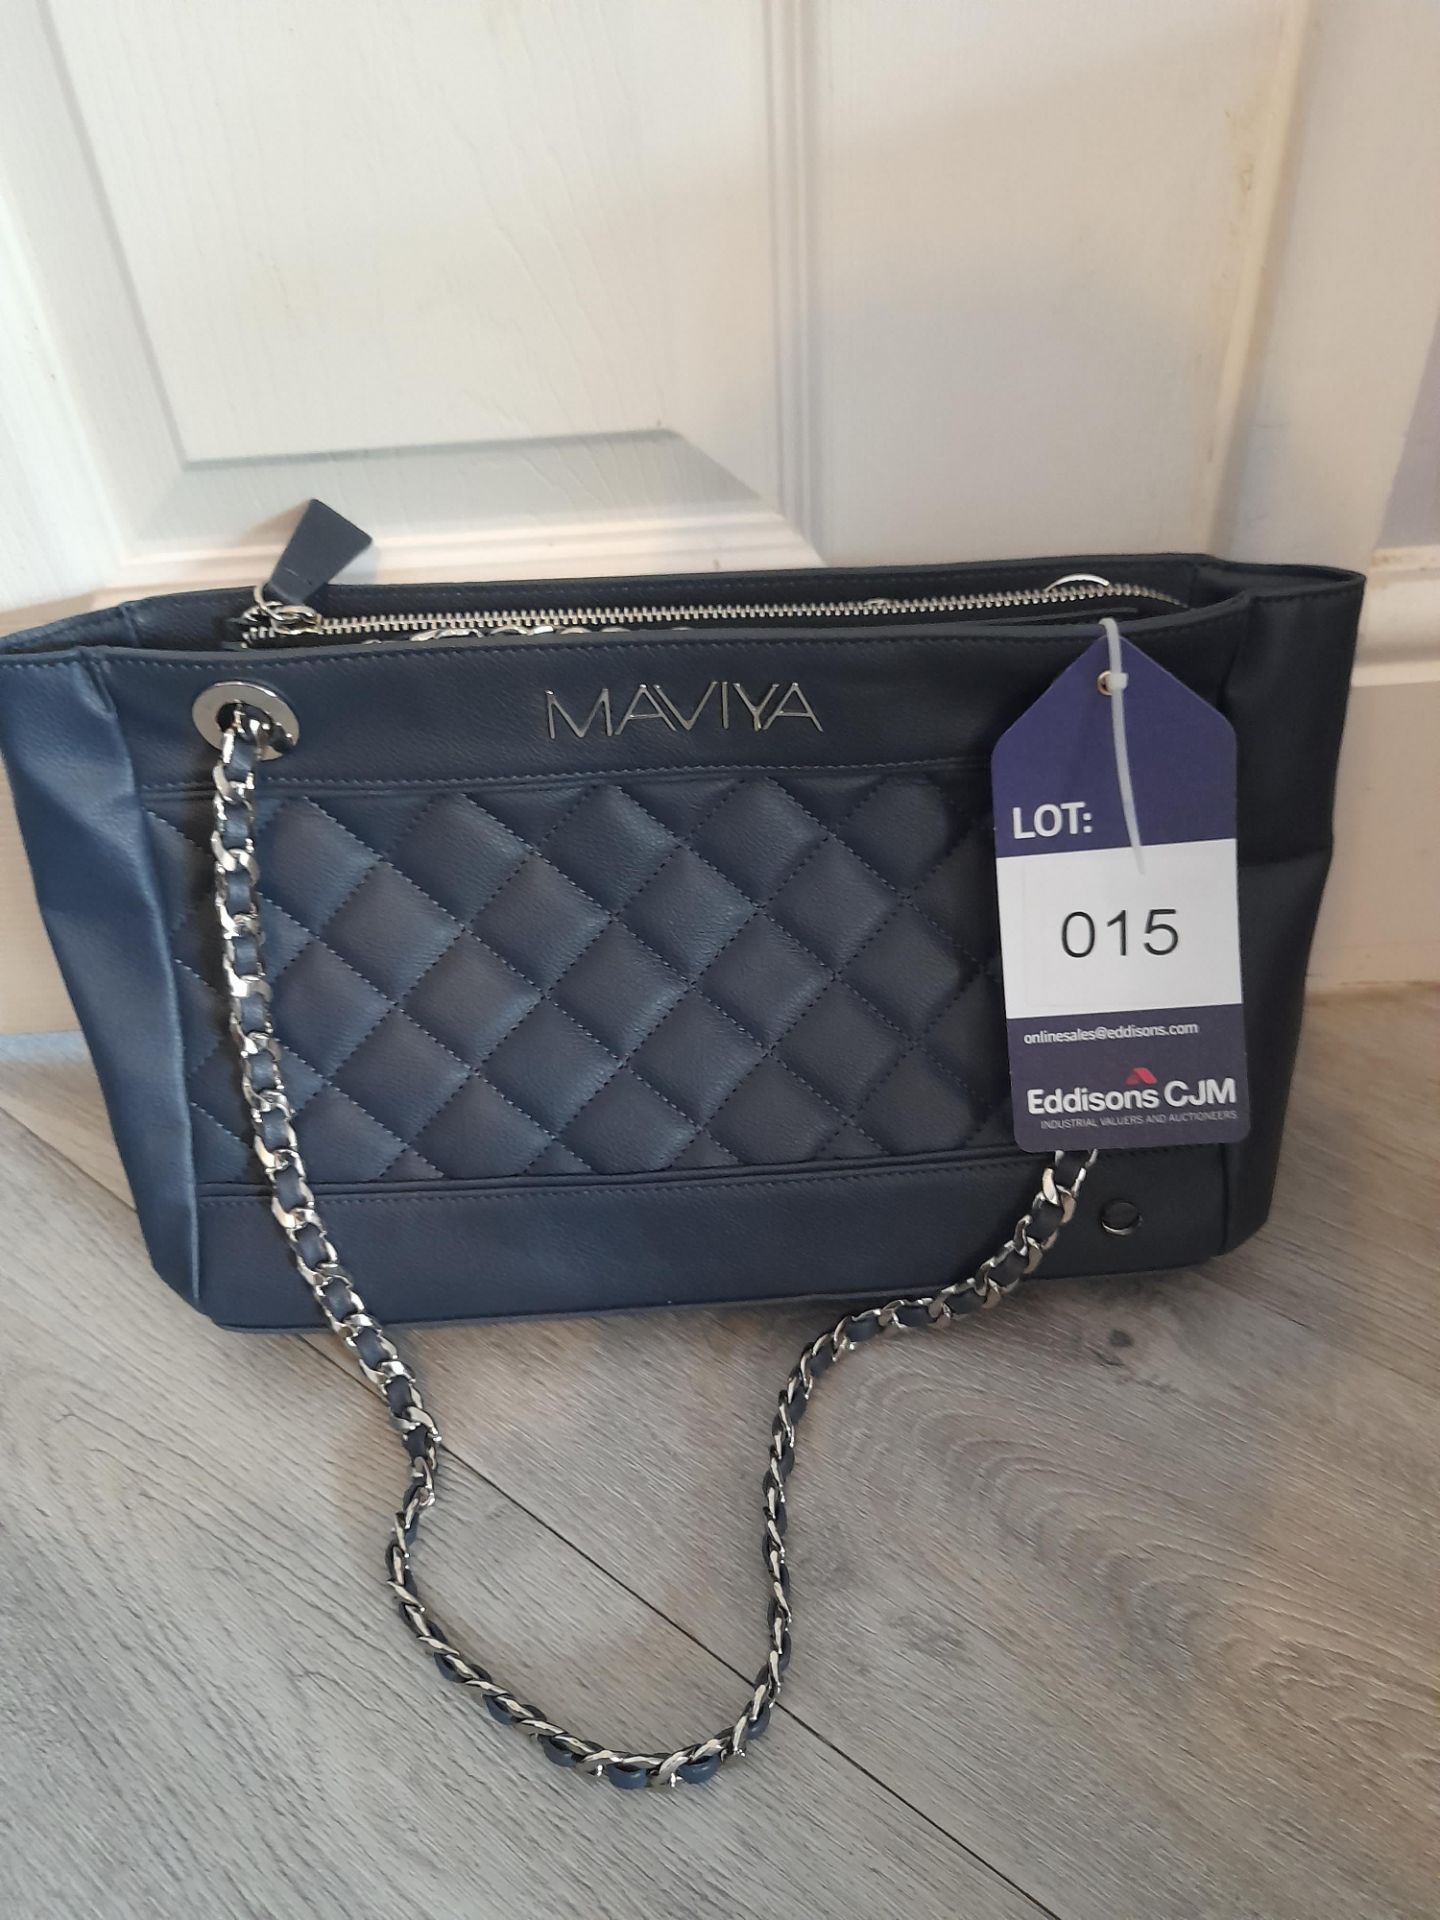 Maviya “Chicie” Blue Vegan Italian Leather Shoulder Bag with smooth finish and quilted effect,